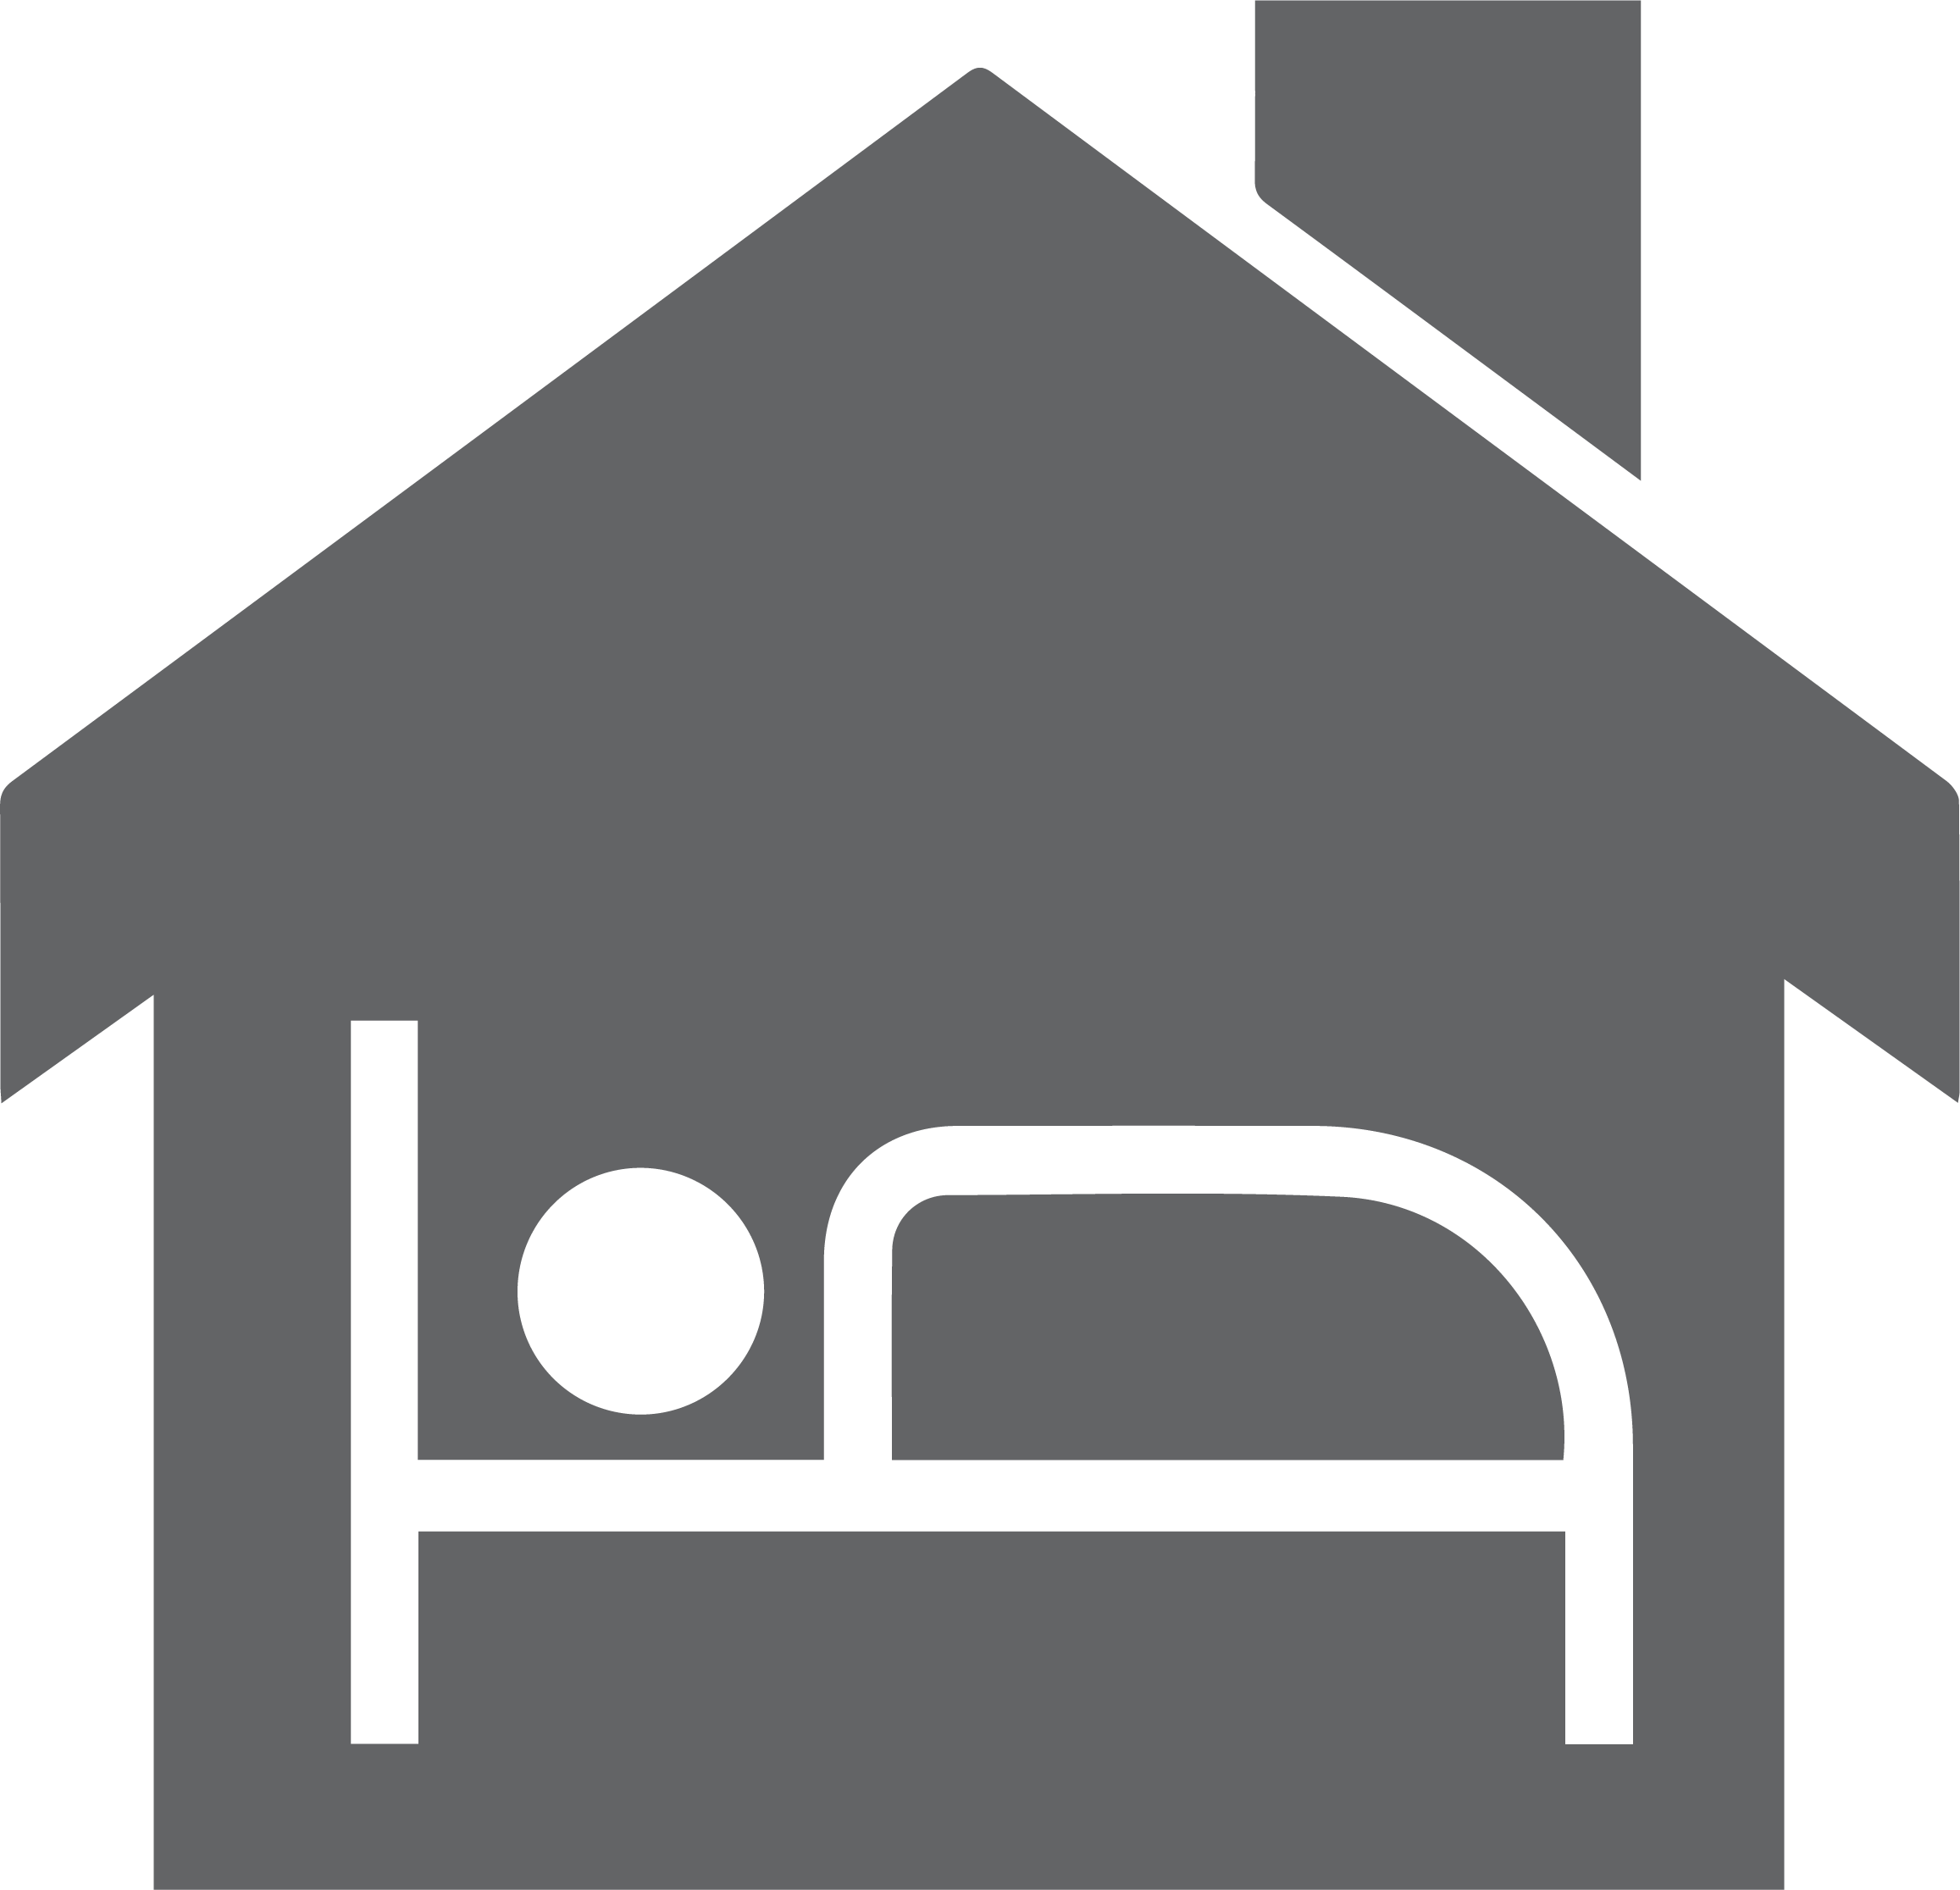 House icon with person in bed